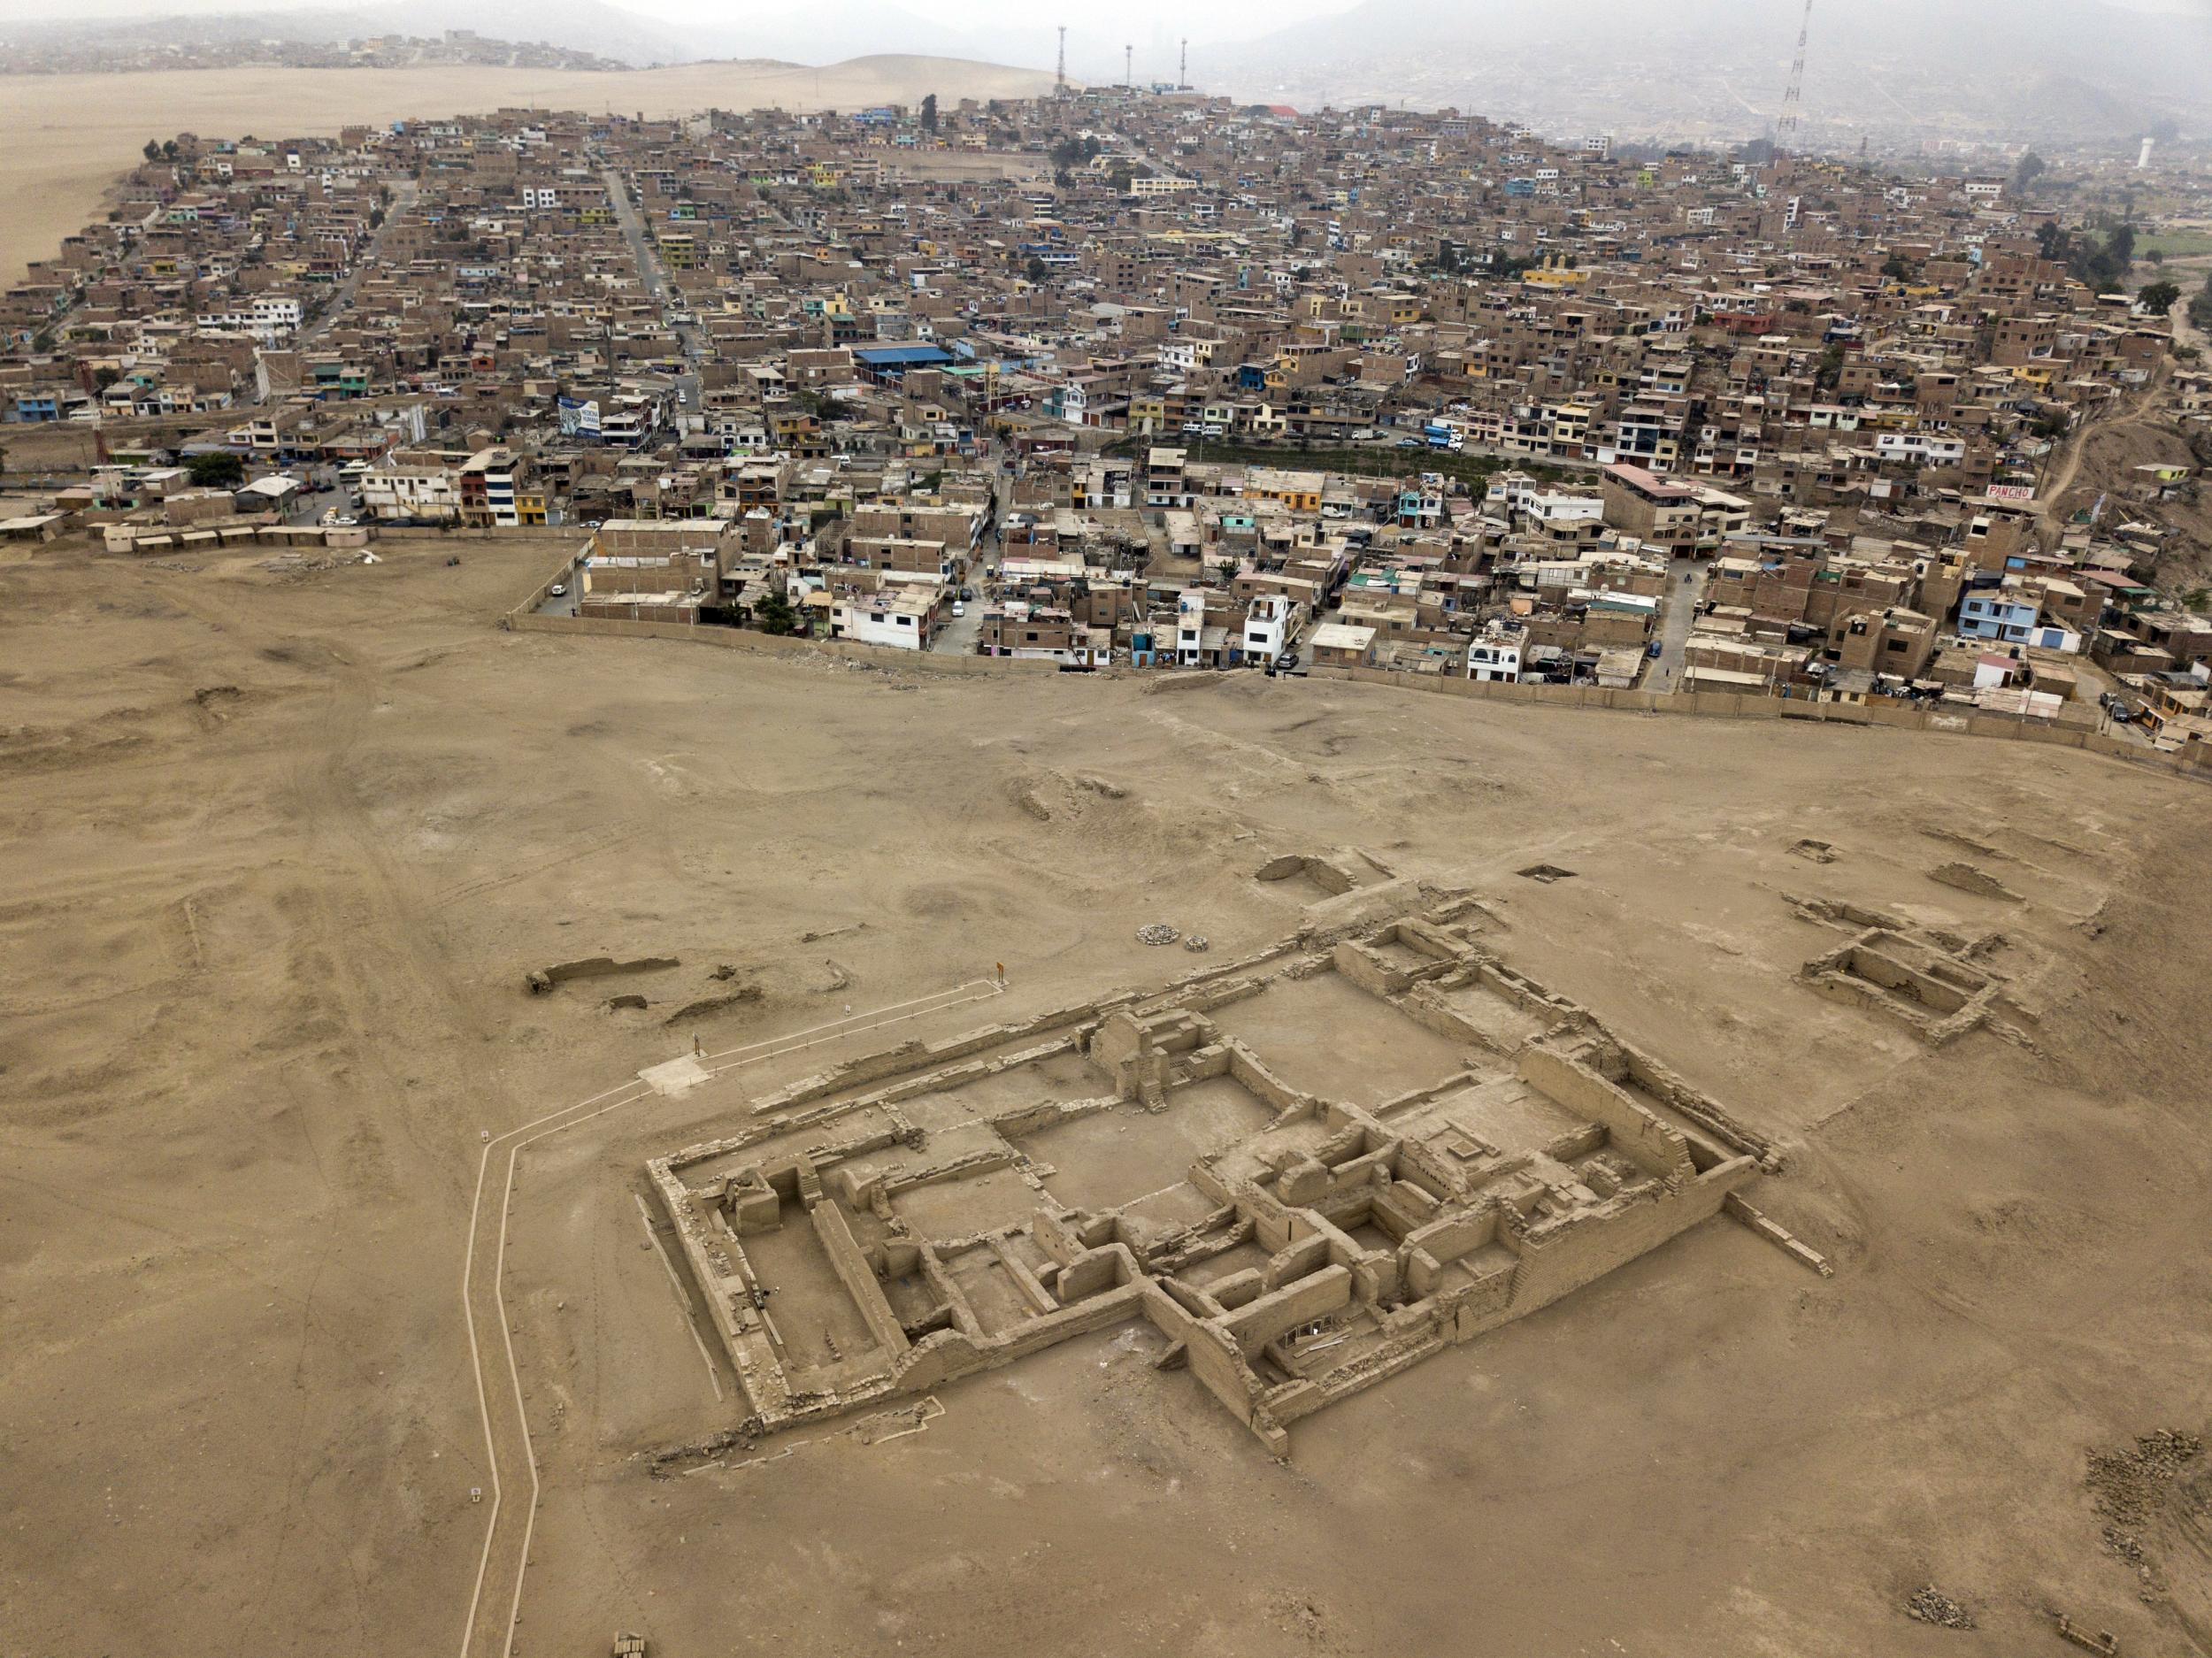 Homes in the Lurin district stand near the archeological site Pachacamac